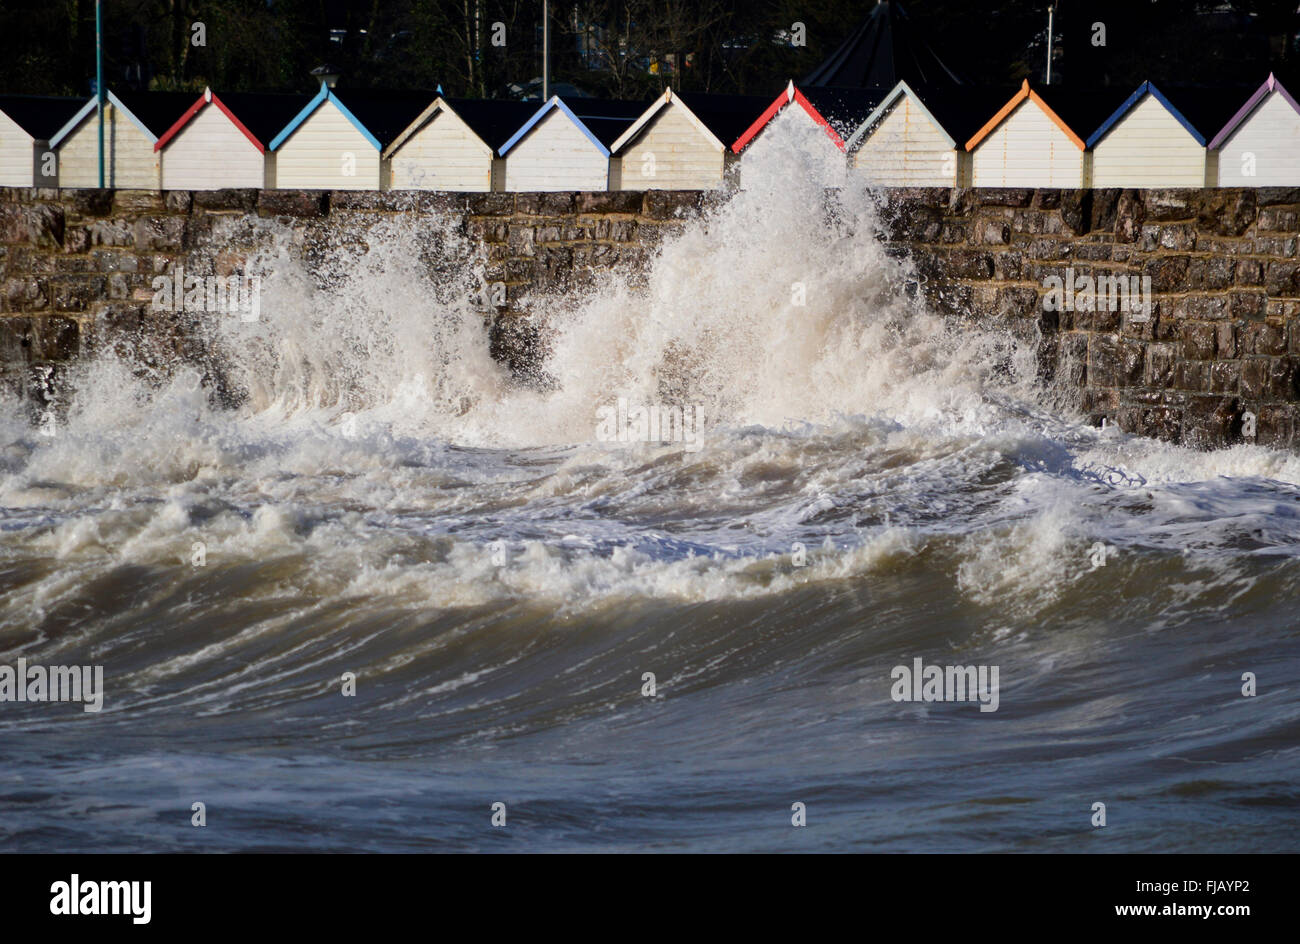 Rough sea against background of beach huts Stock Photo